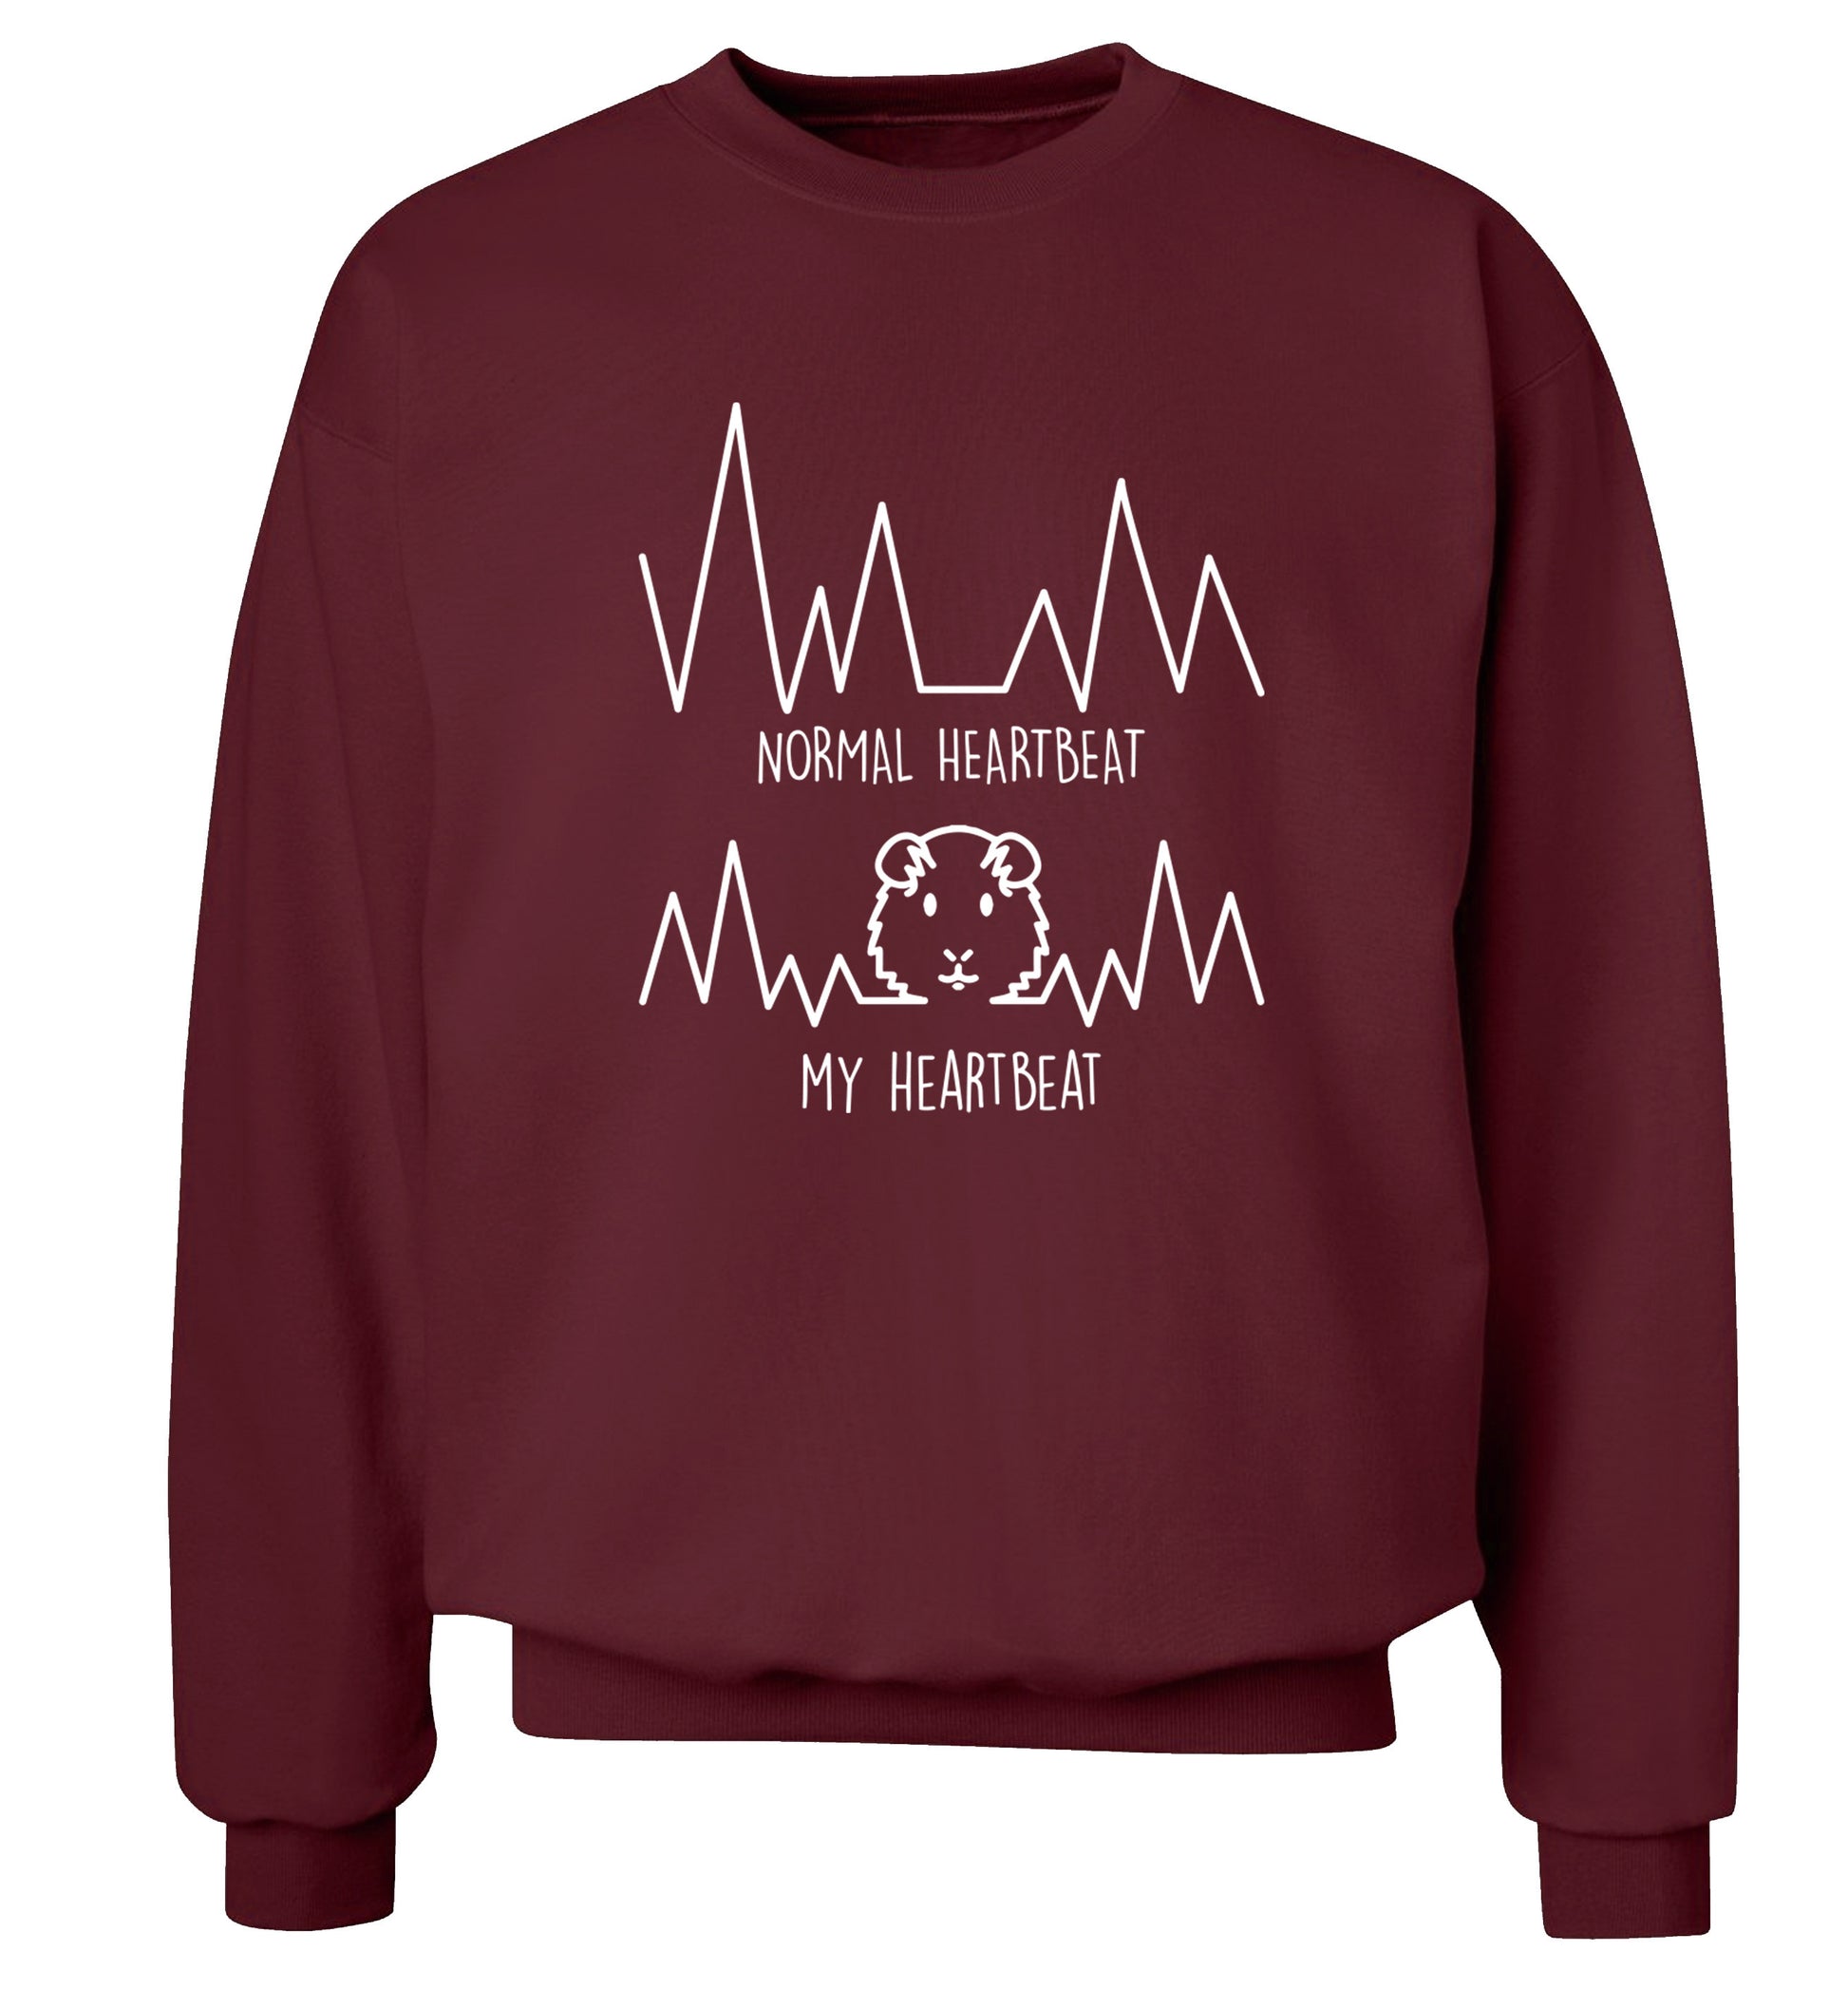 Normal heartbeat vs my heartbeat guinea pig lover Adult's unisex maroon  sweater 2XL